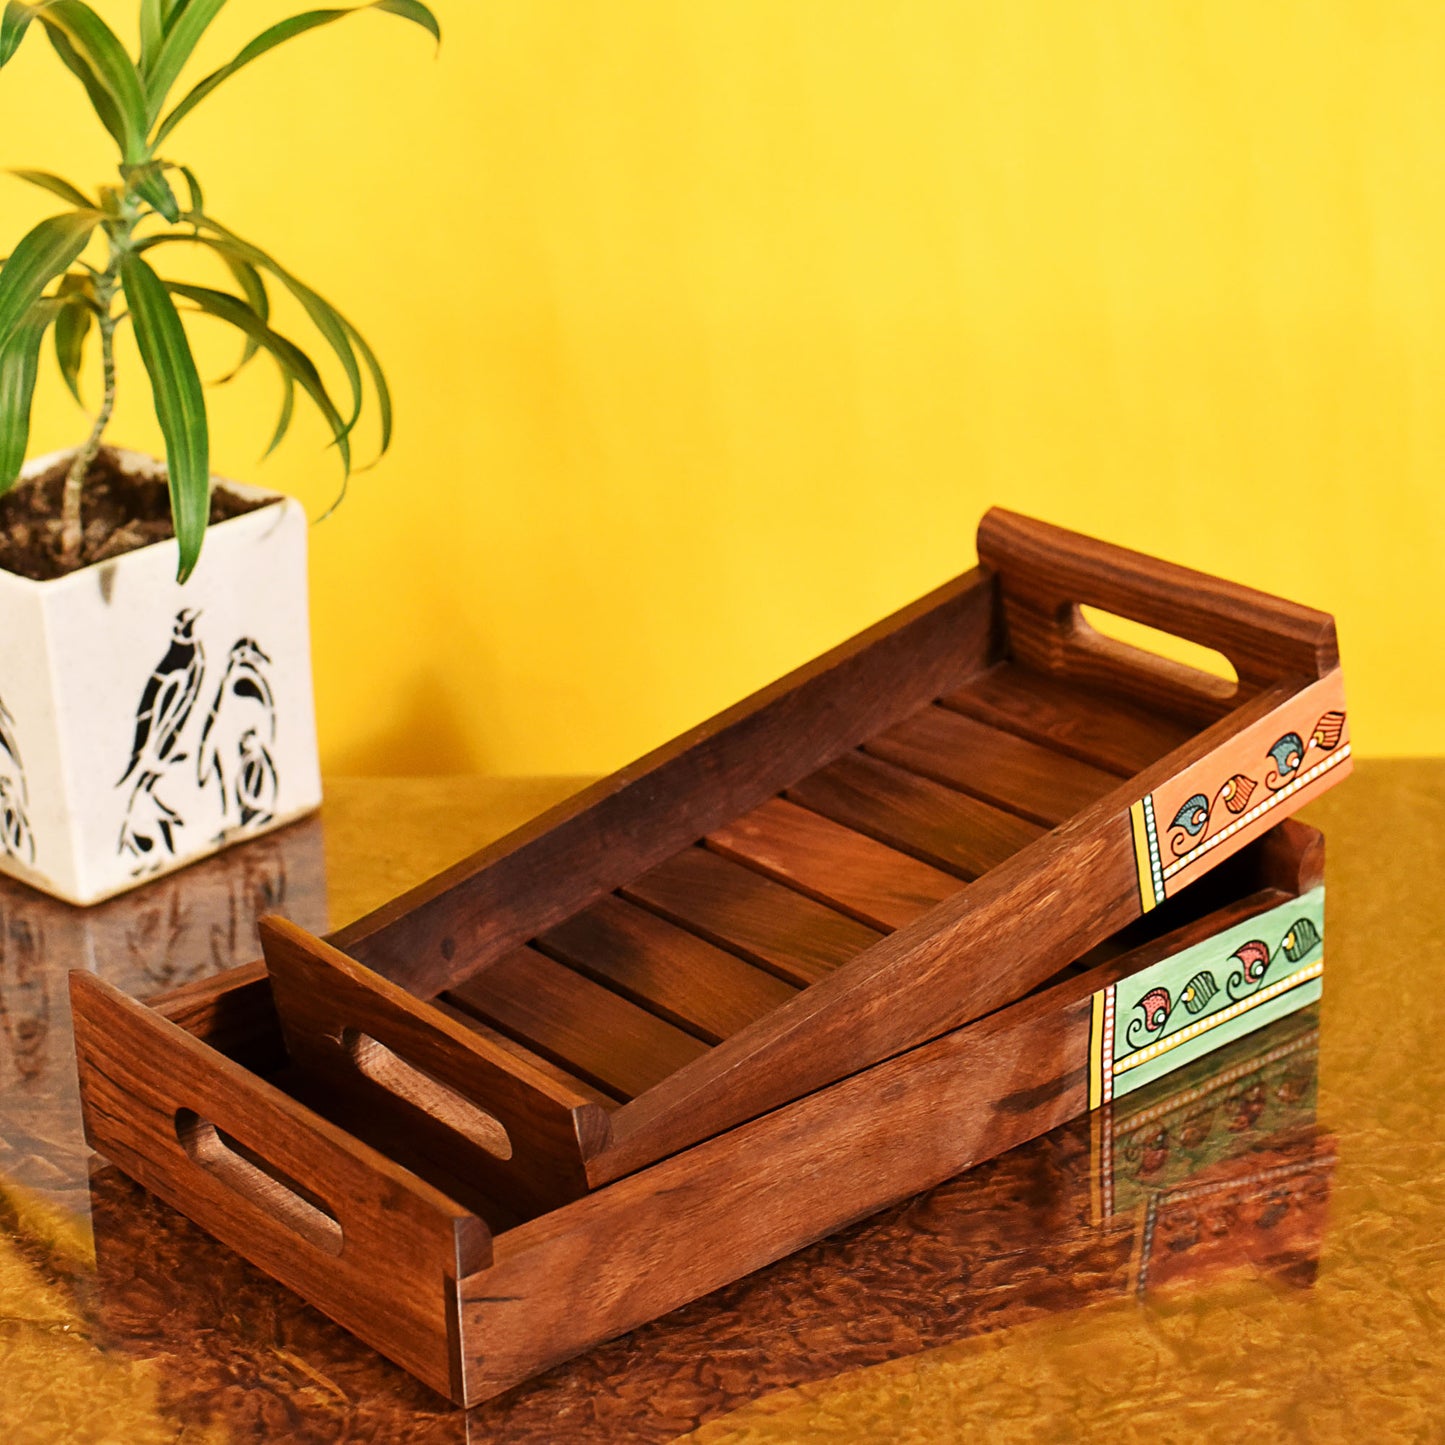 Trays with Madhubani Patterns Handcrafted in RoseWood (set of 2) (13x7/11.5x5.5")